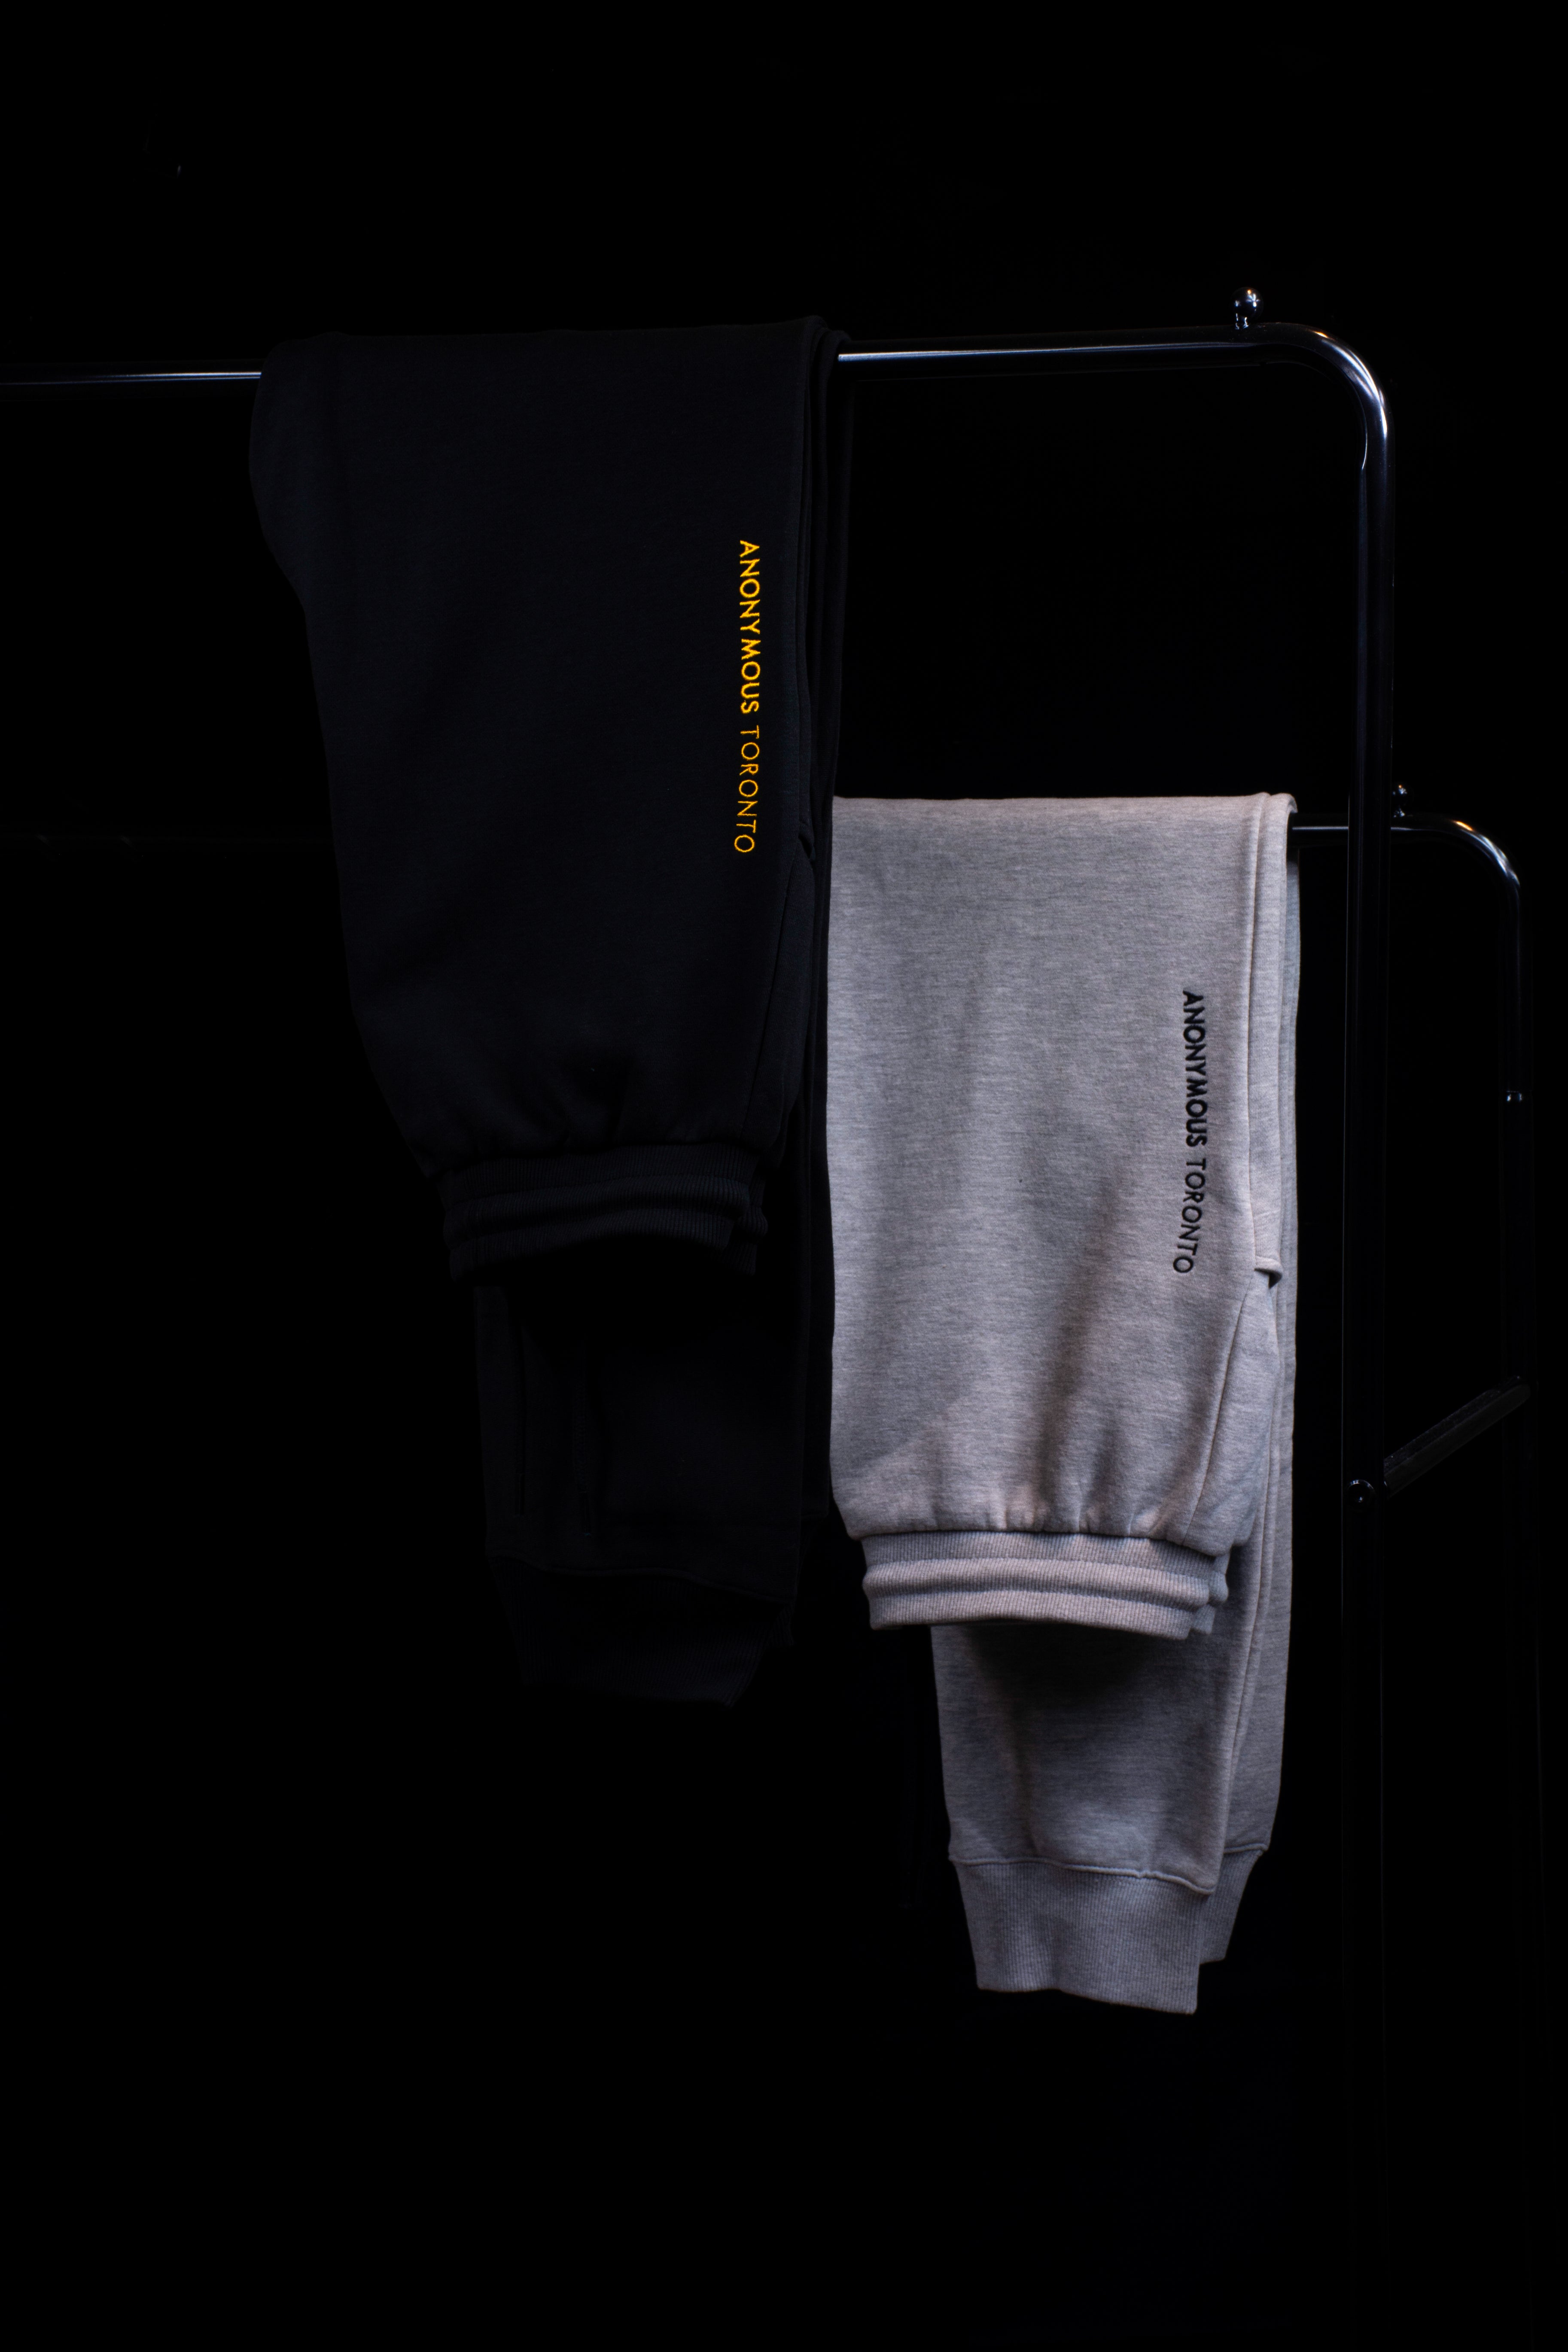 Relax-Fit Sweatpants - Anonymous Toronto